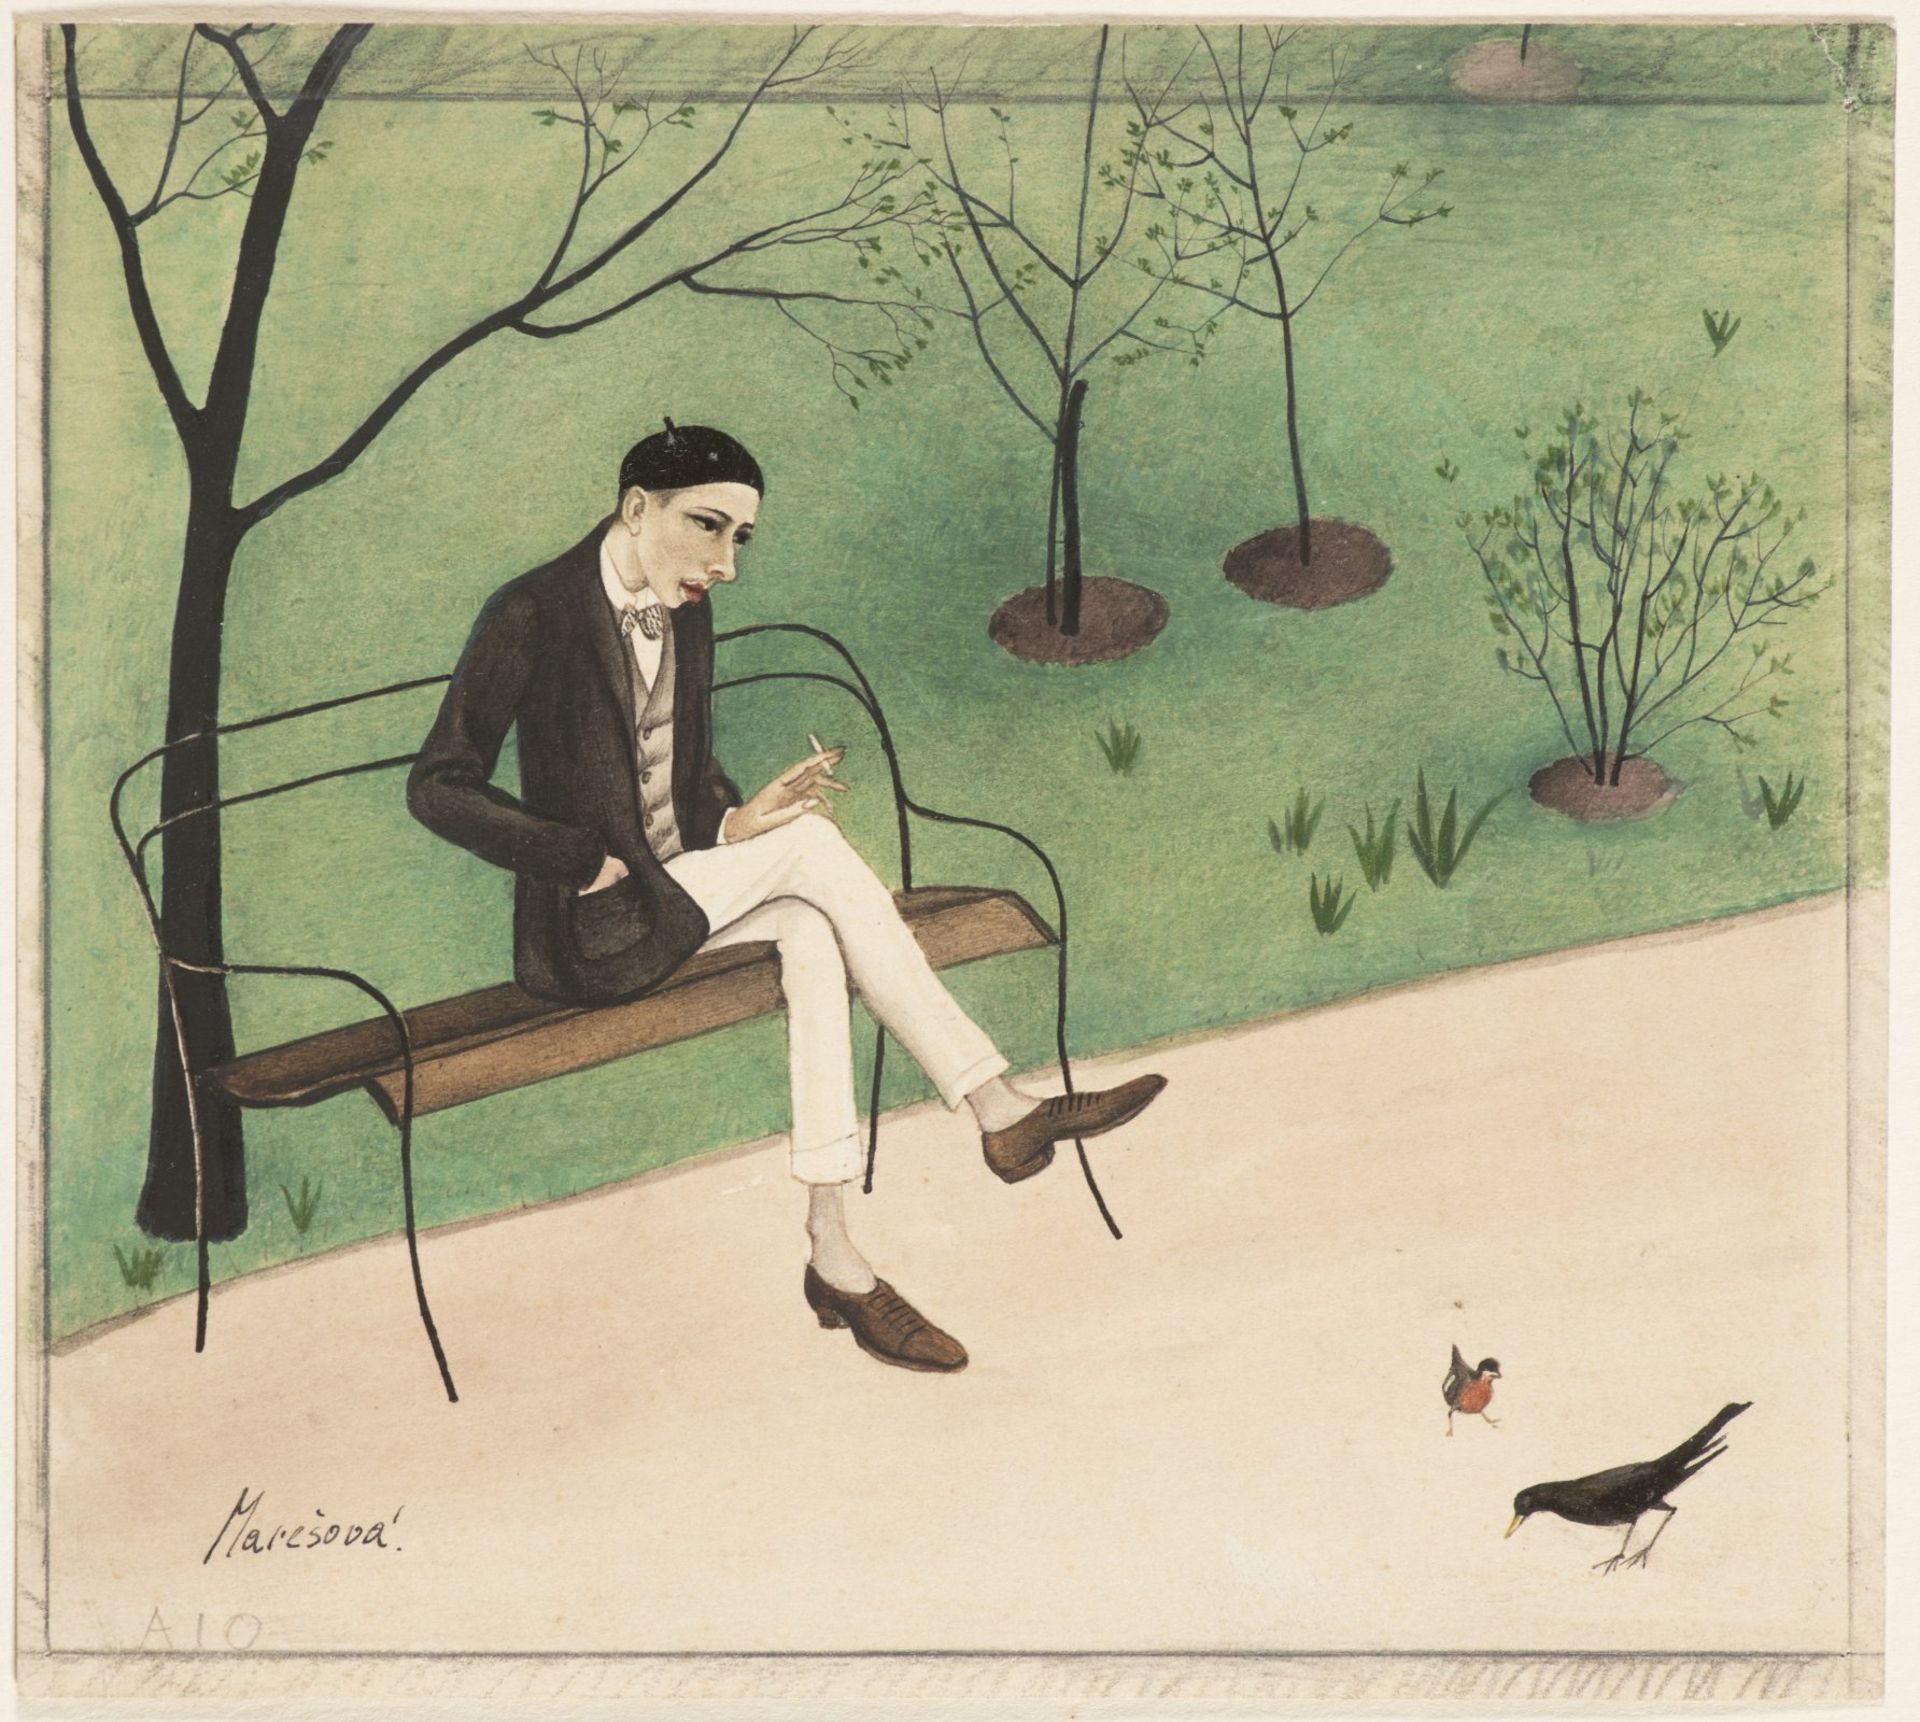 MILADA MAREŠOVÁ 1901 - 1987: IN A PARK ON A BENCH Ca. 1930 Watercolour, paper In frame 12 x 14 cm